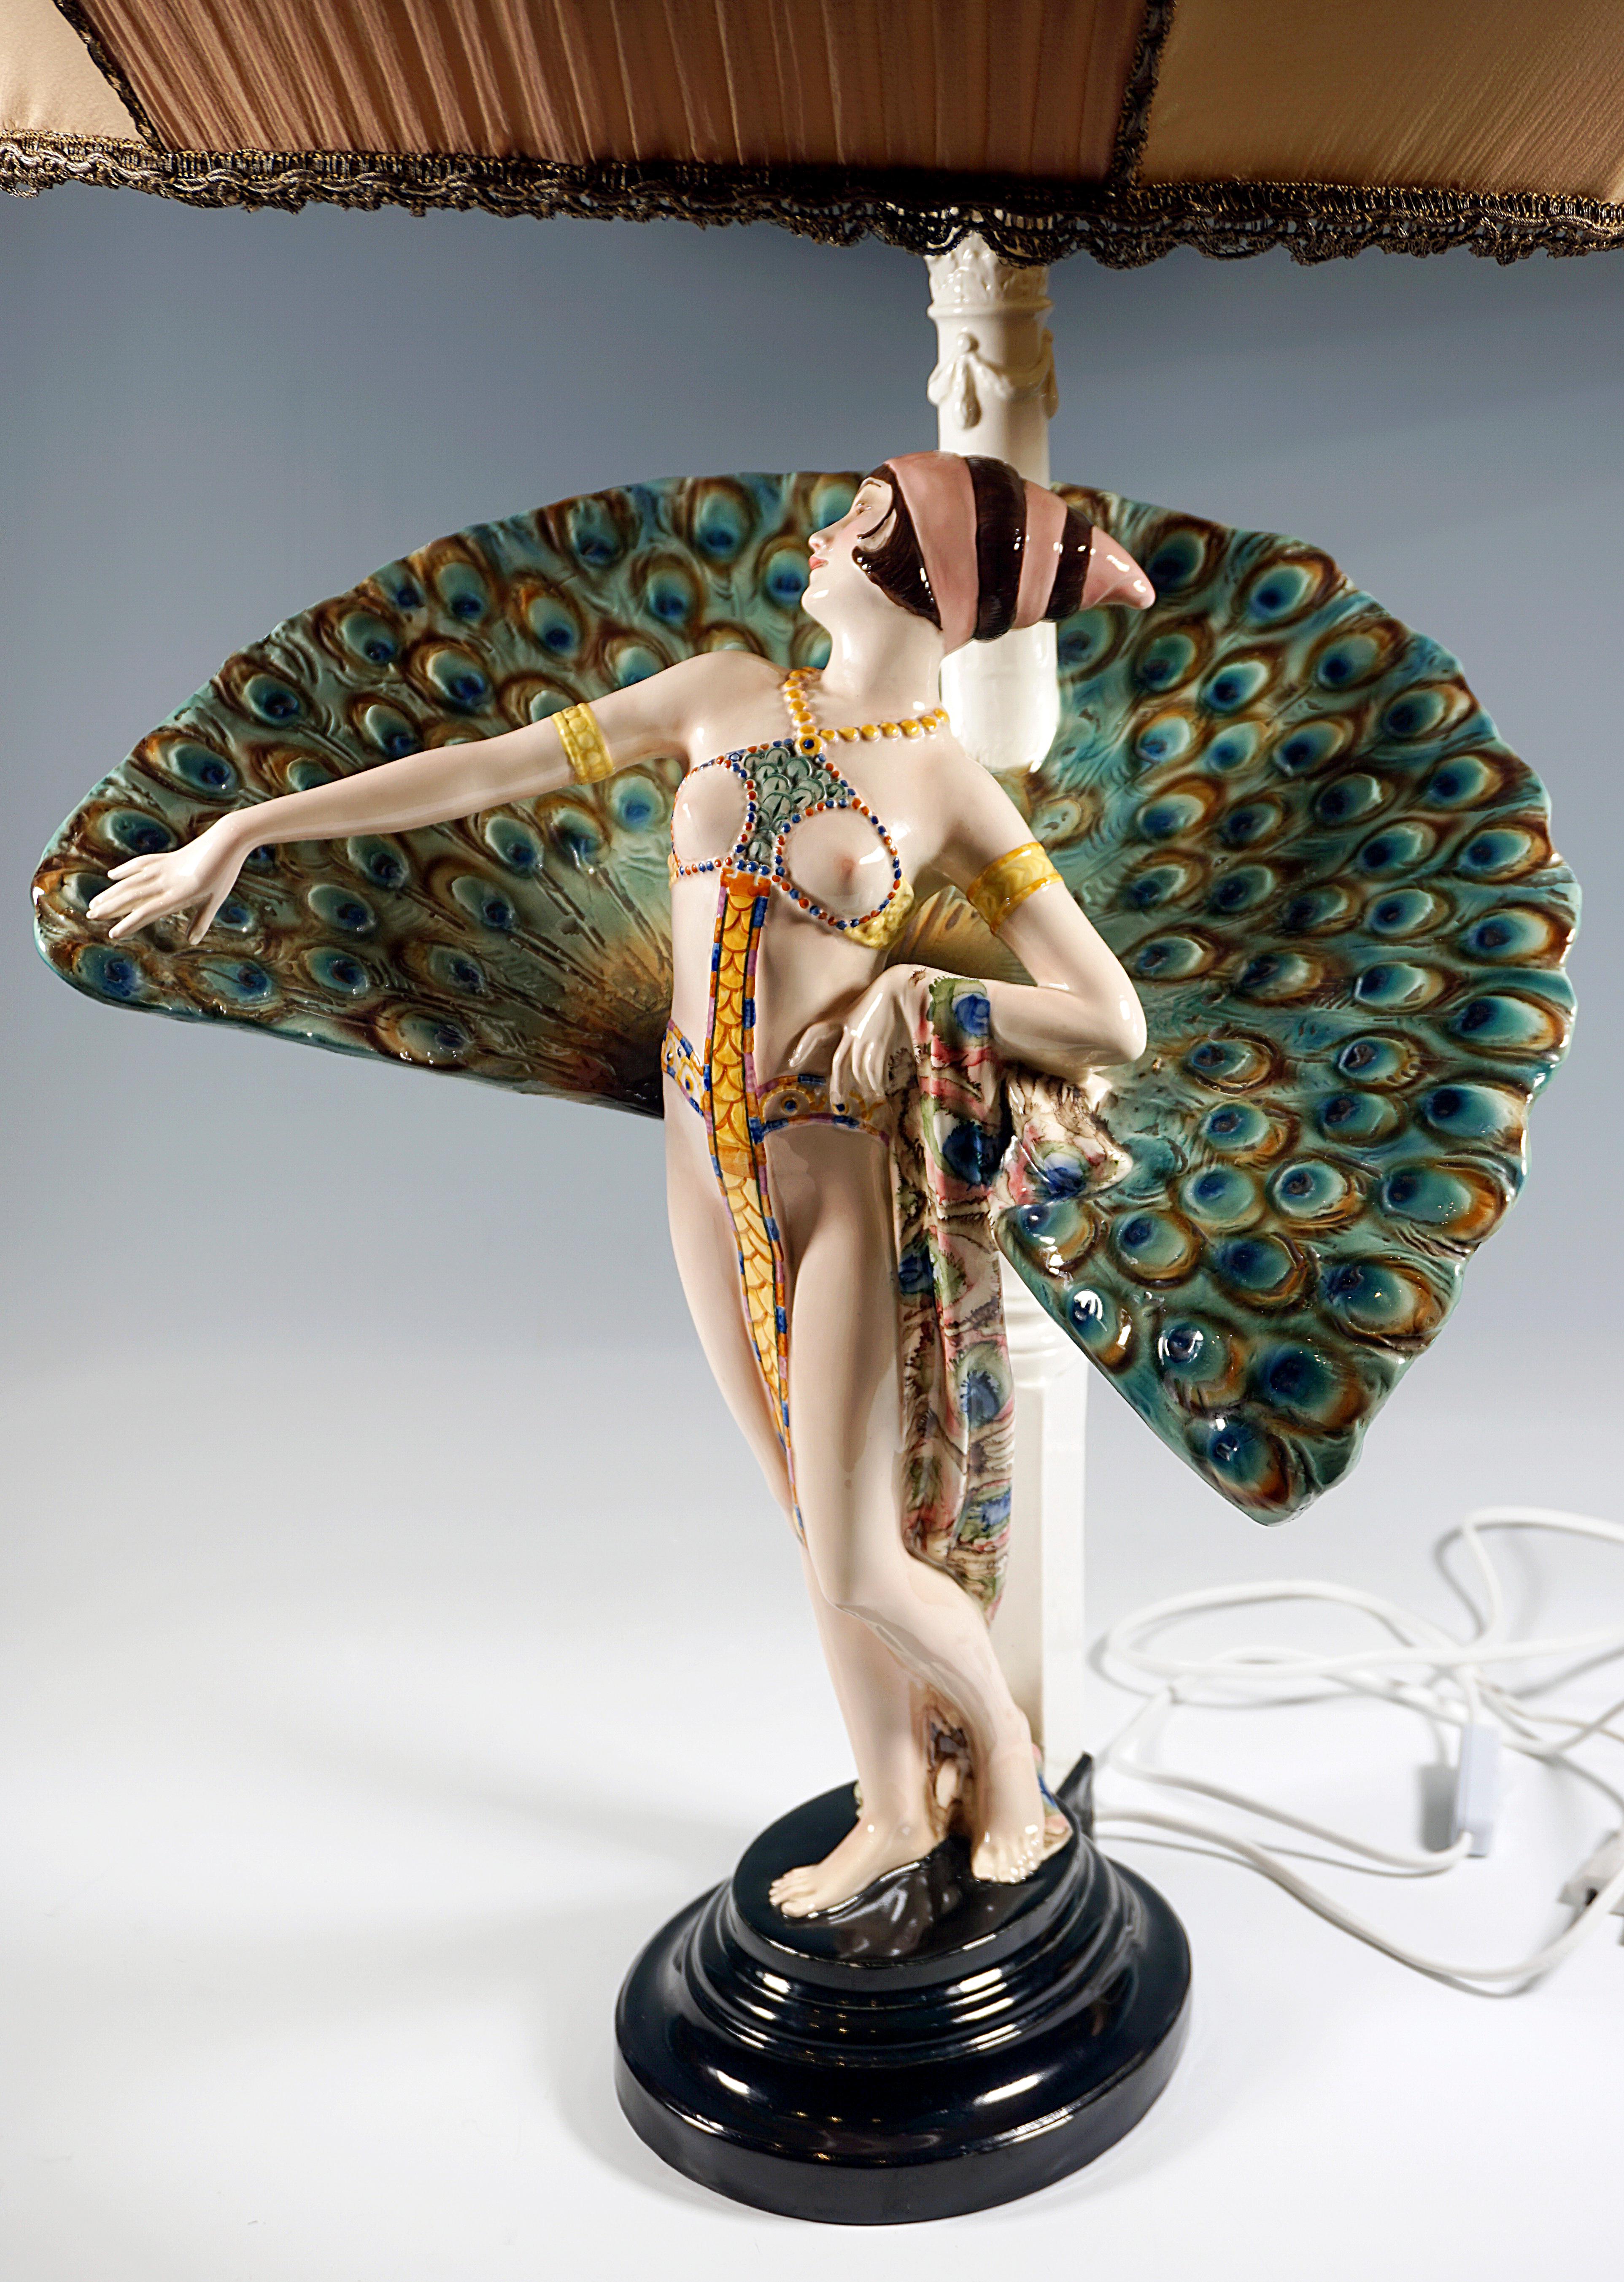 One of the most extraordinary and decorative models that Goldscheider ever has produced:
Upright dancer, leaning slightly backwards and looking to the right exotic dancer with bustier and narrow loincloth, on the short, brown hair a pink-brown